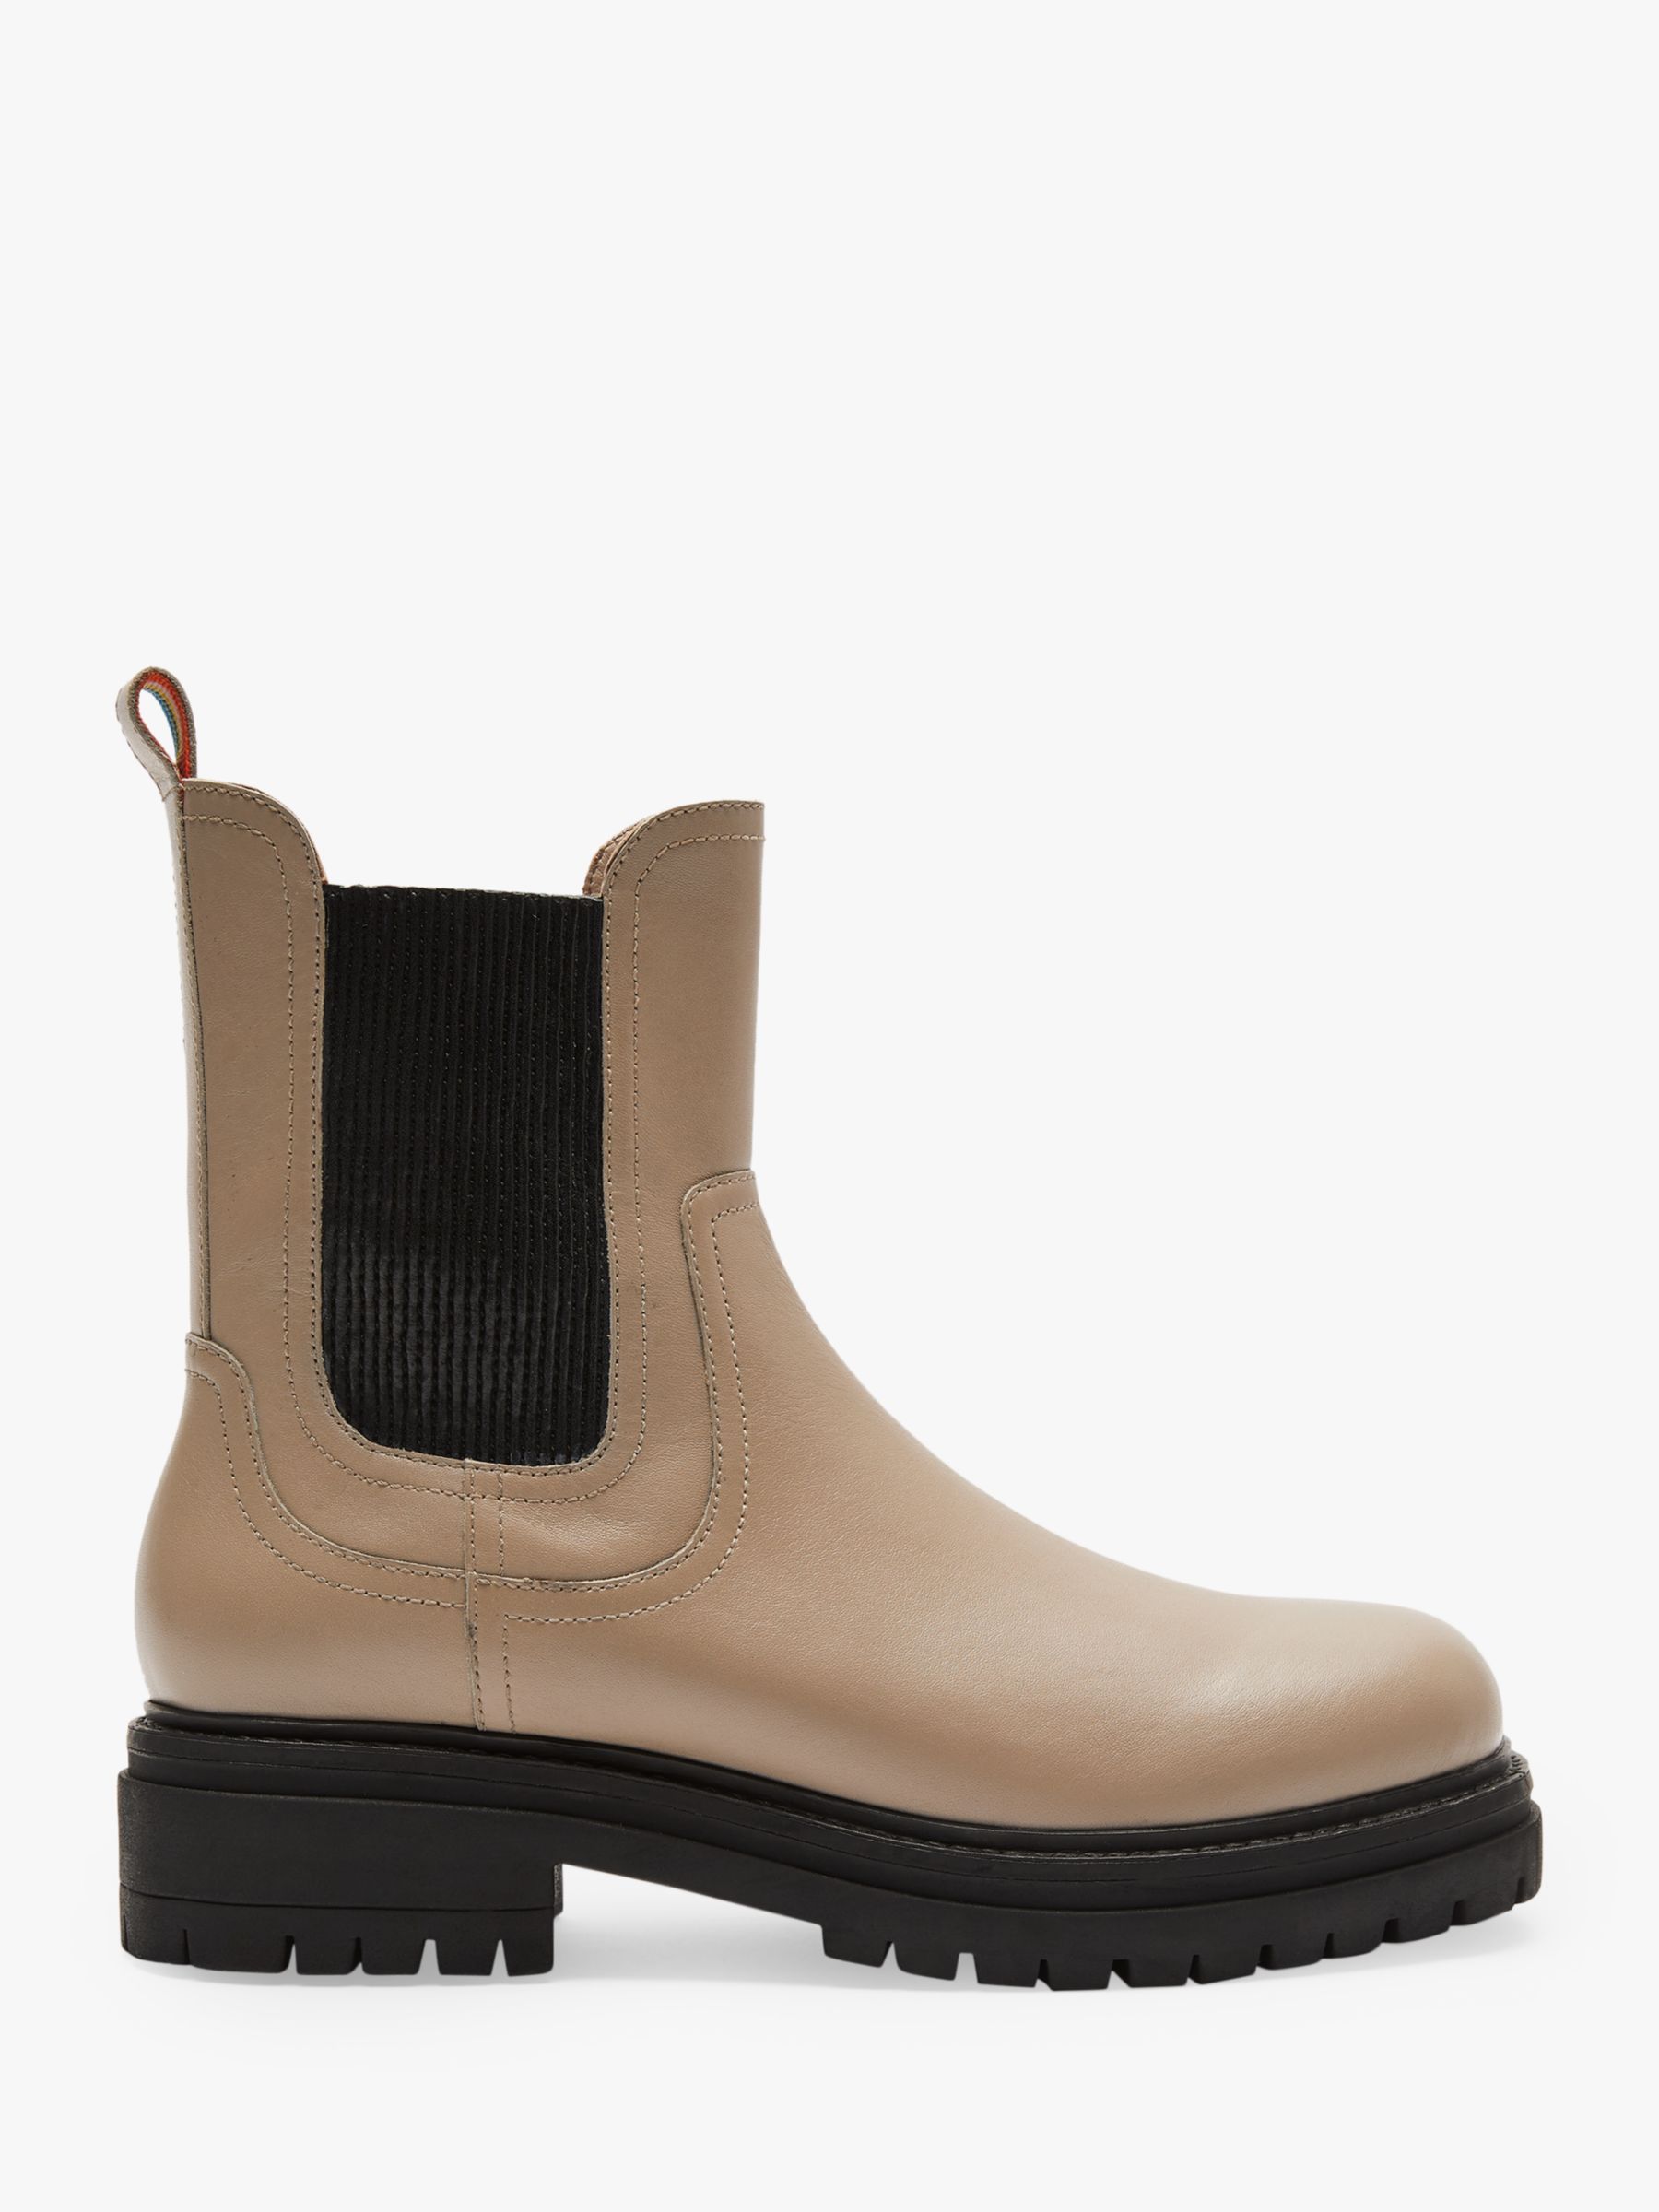 Celebrity Misery Abbreviation Boden Chunky Leather Chelsea Boots, Irish Cream